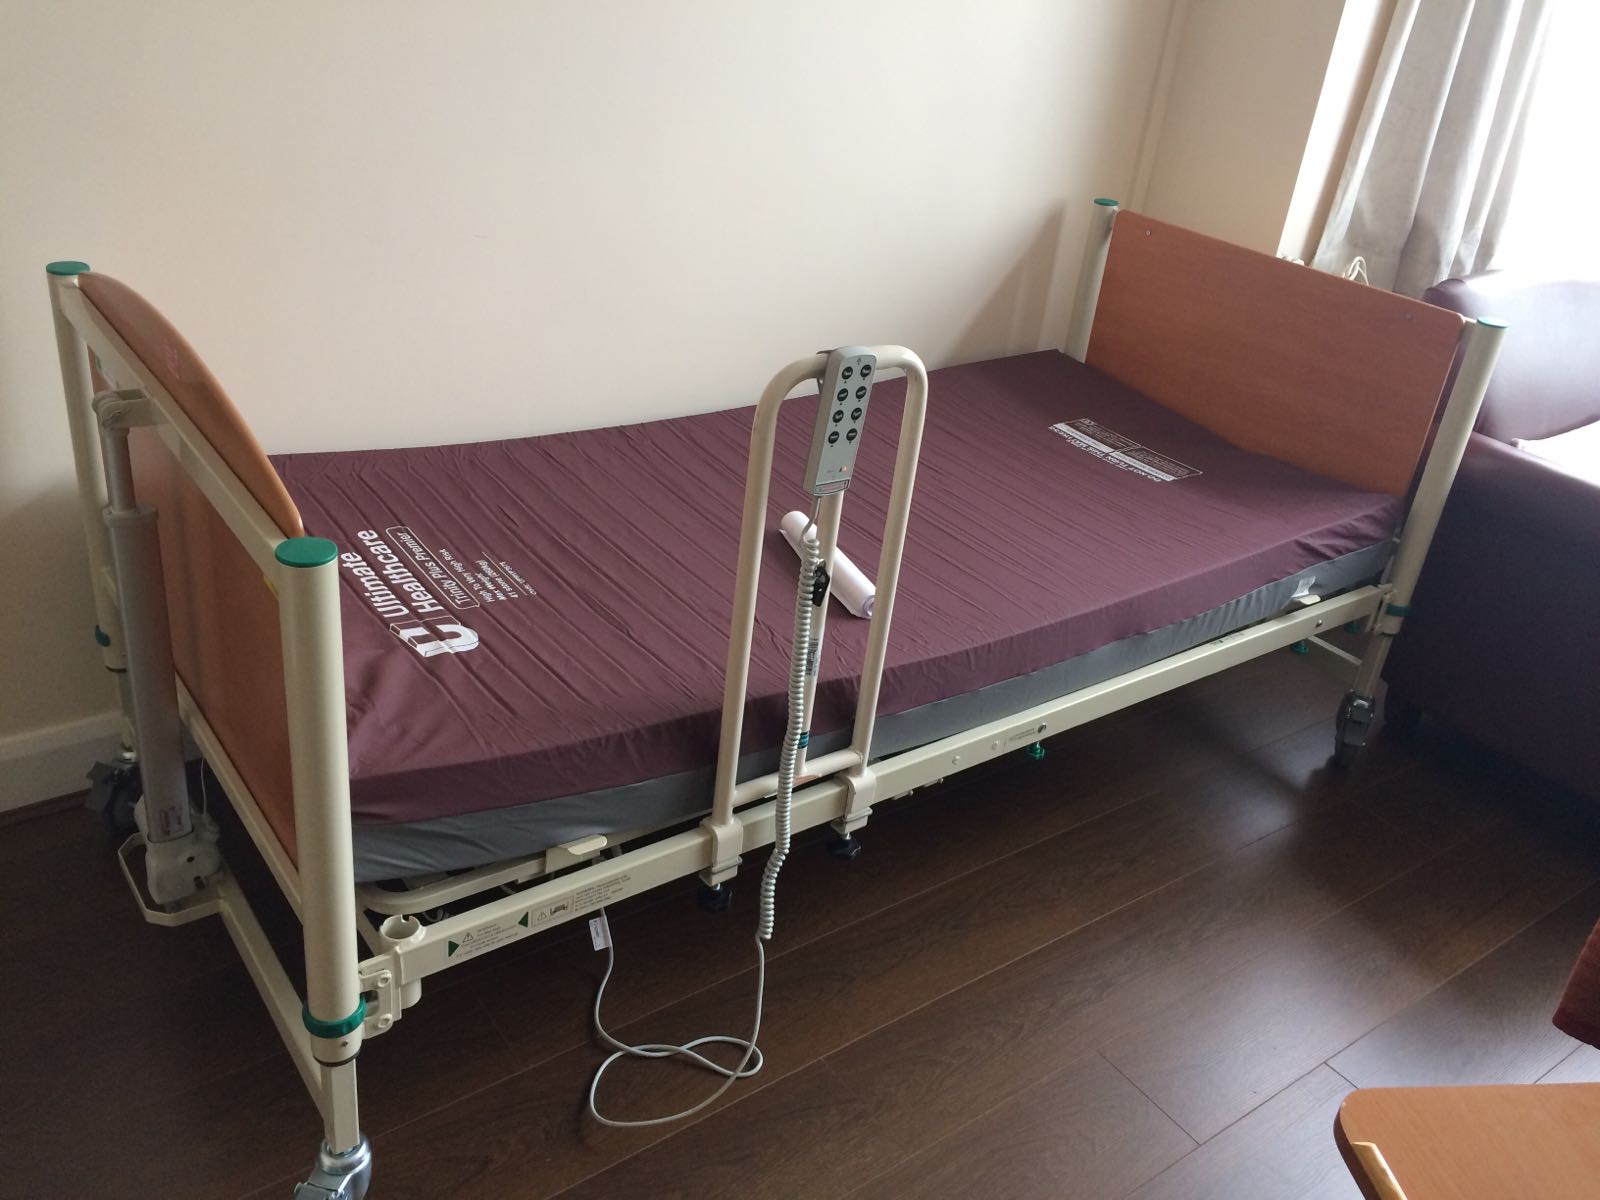 The holy grail of the NHS-paid-for equipment: The Electric Bed. The mattress is a special one for someone, like me, who is forced to spend a lot of the day in bed. 